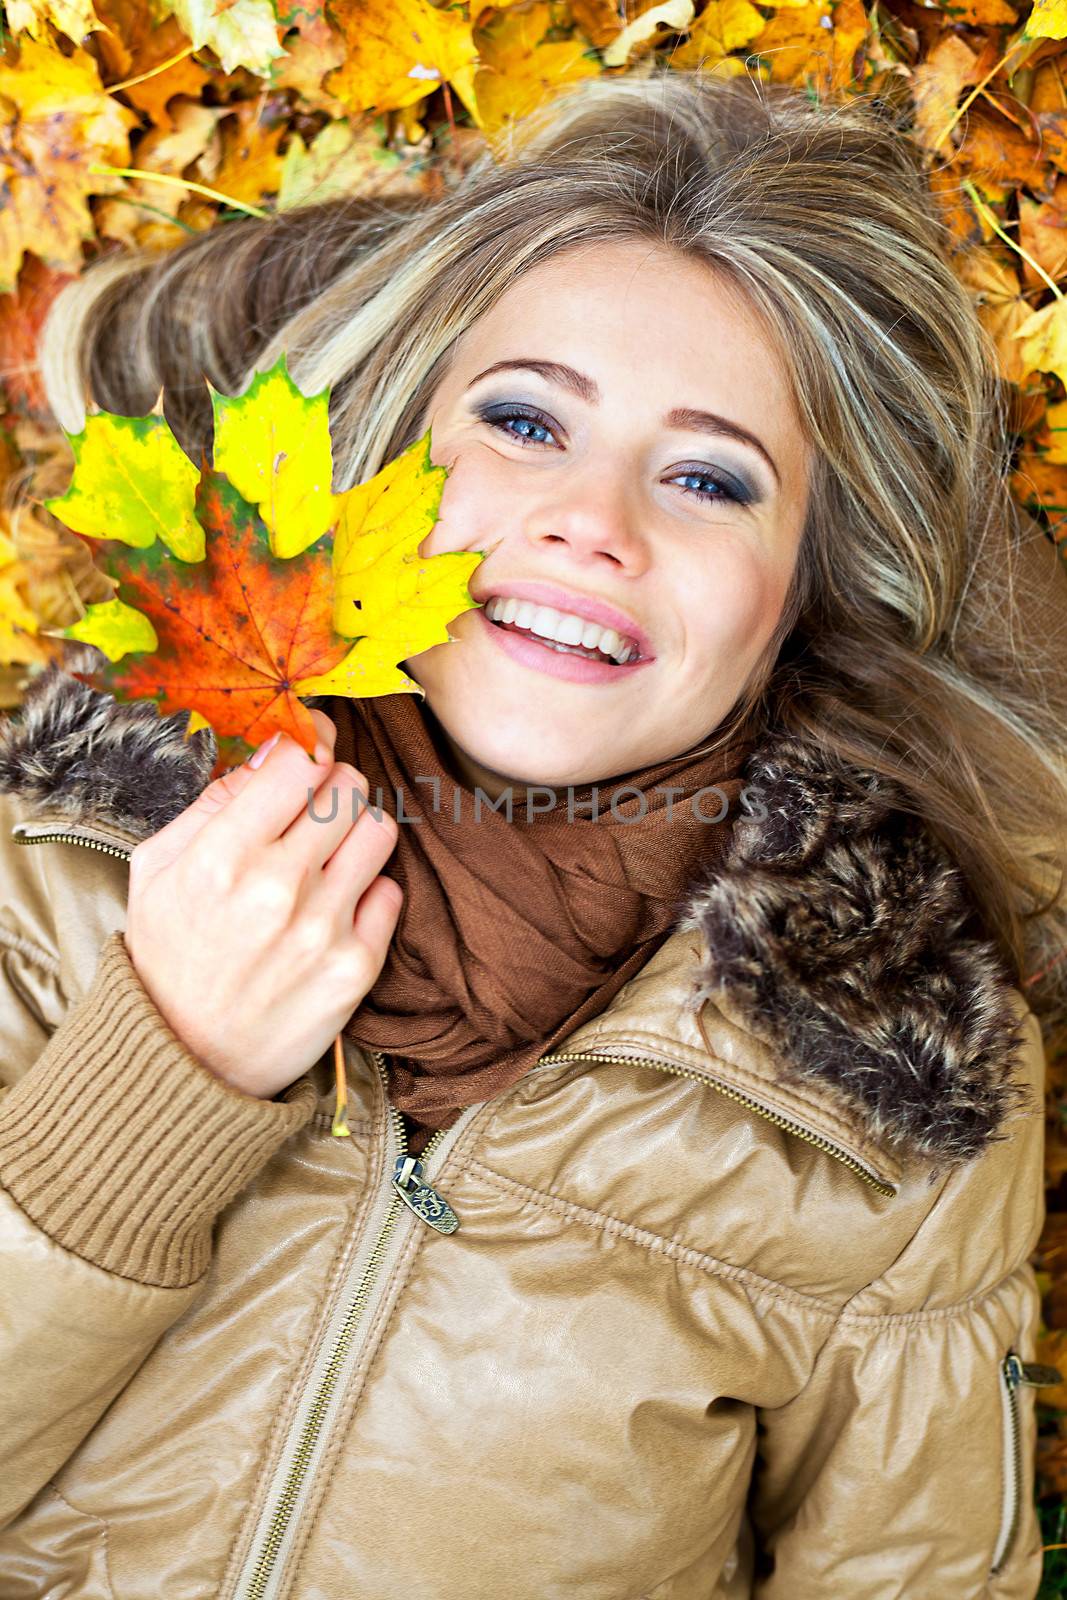 Closeup portrait of a young blond woman surrounded by autumn leaves